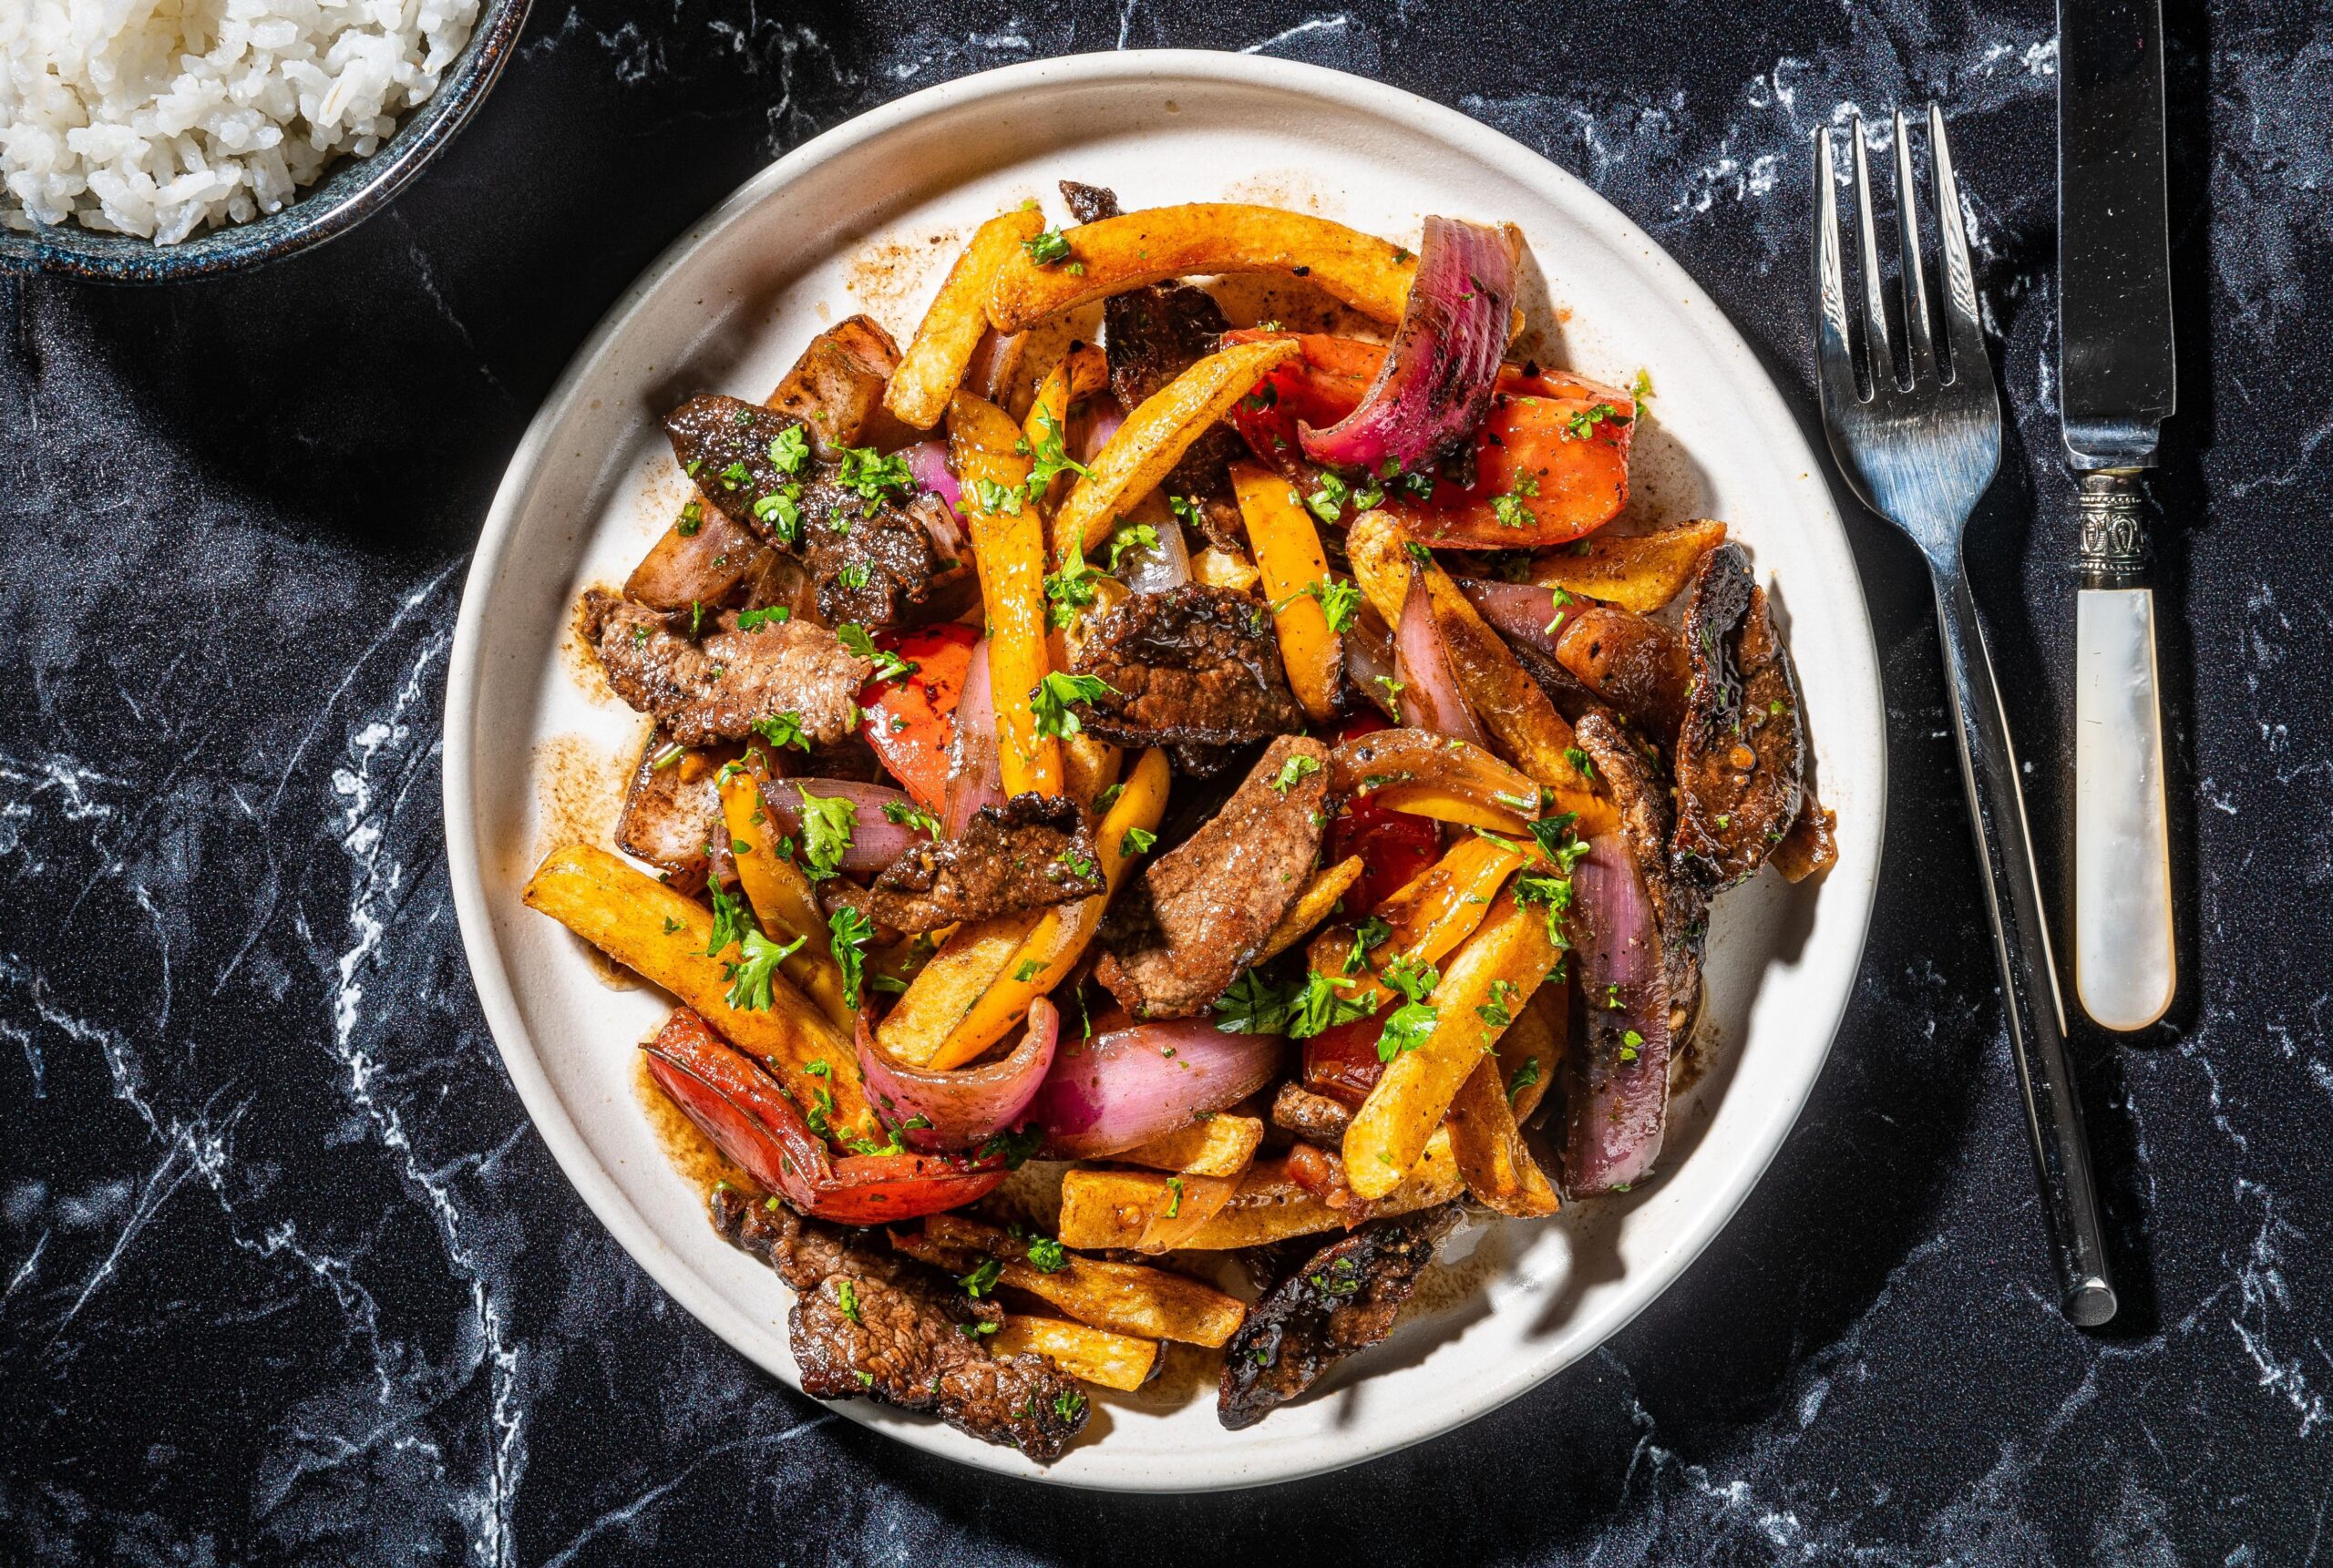  A colorful plate filled with fresh veggies, tender beef, and crispy french fries